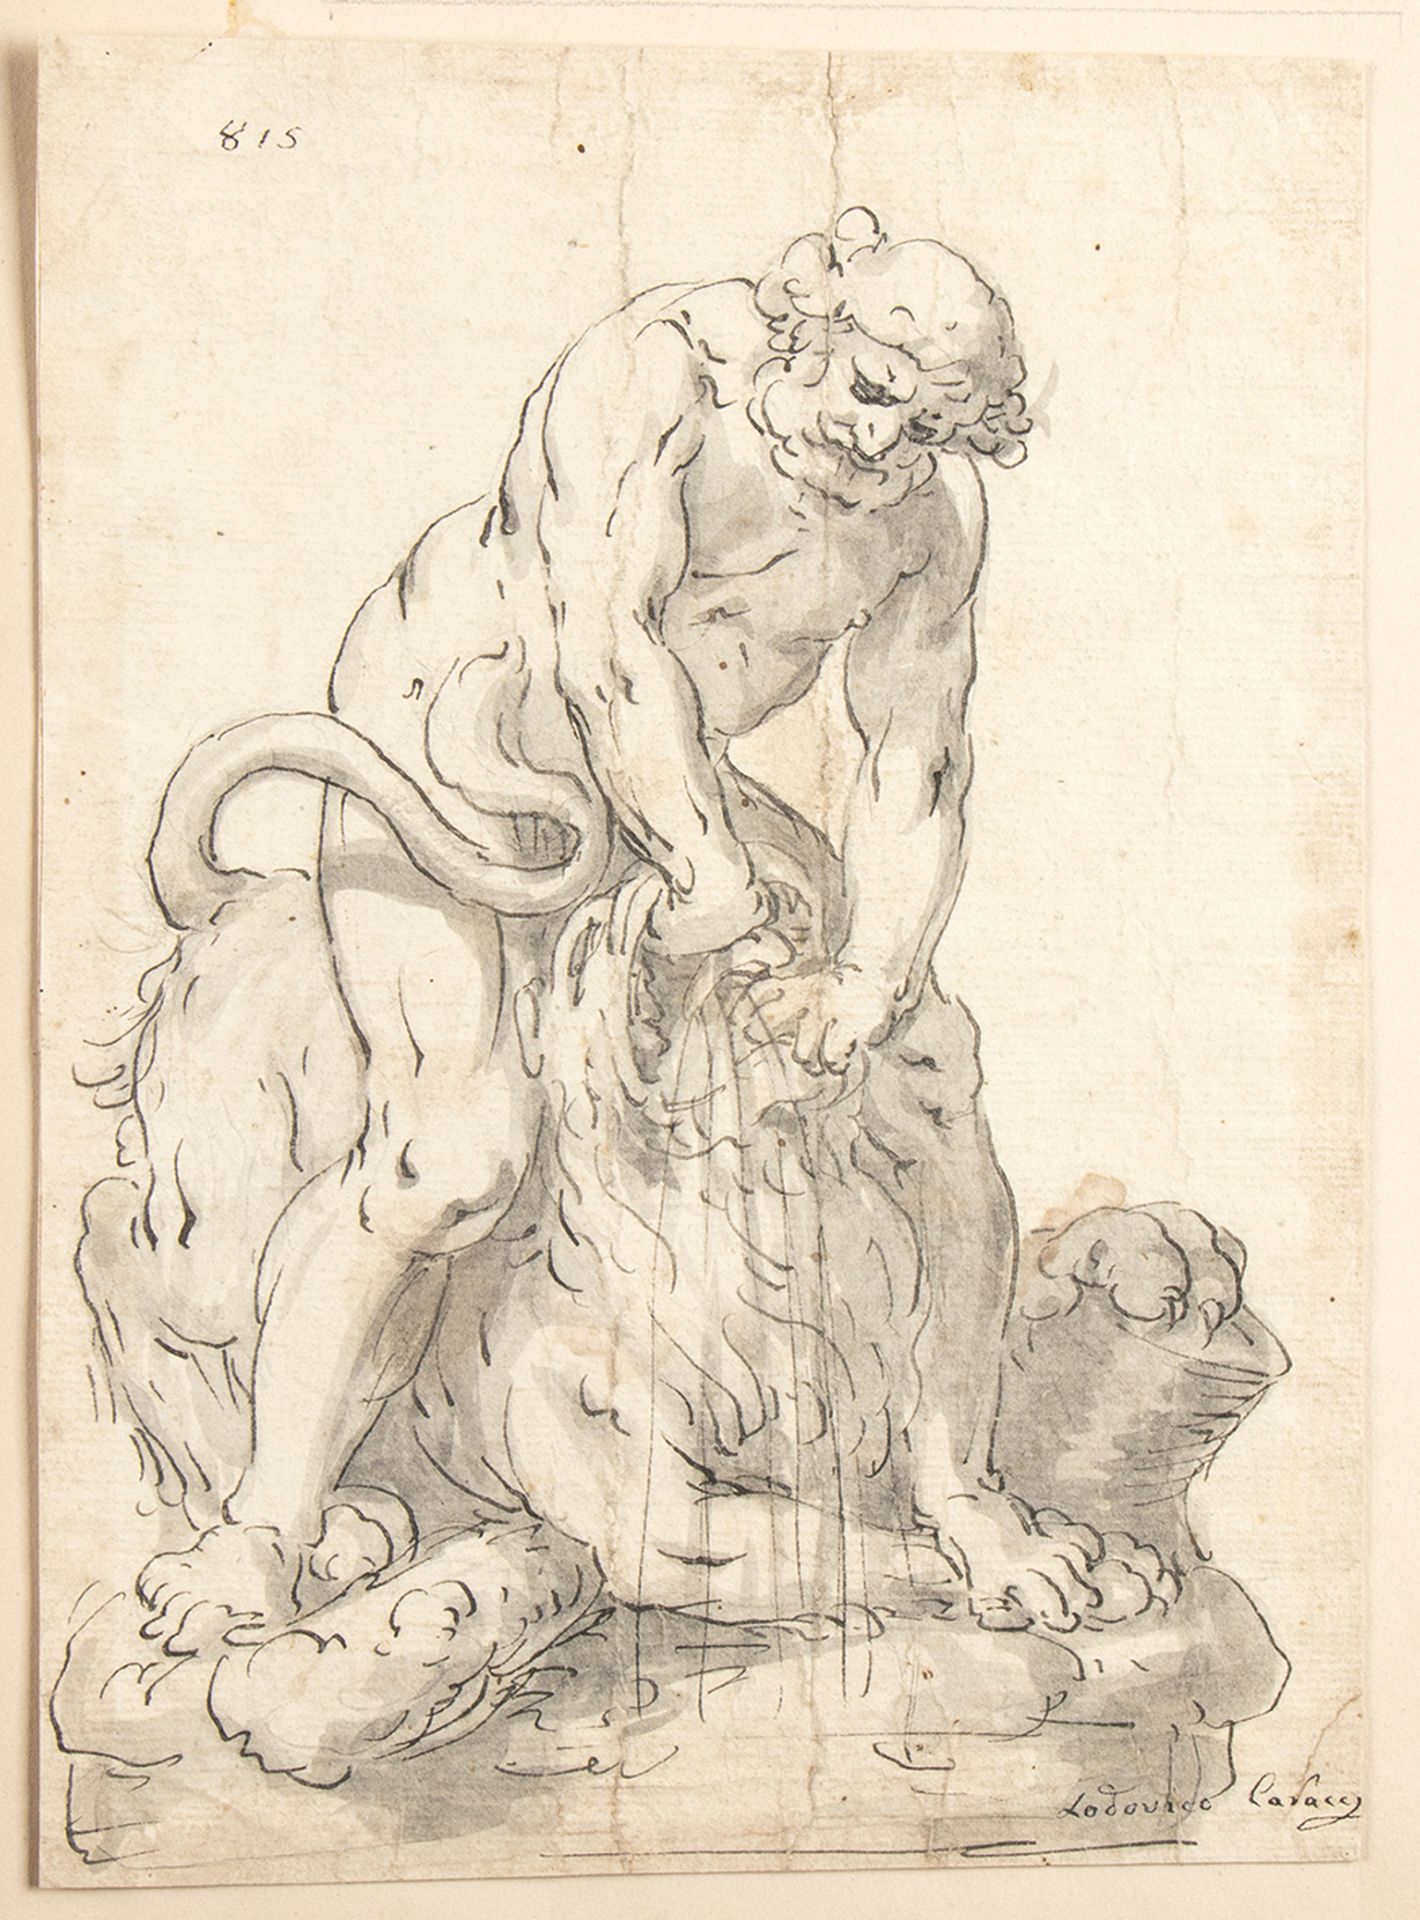 BOLOGNESE SCHOOL, EARLY 17th CENTURY - - Hercules and the Nemean lion - Pen, ink [...]